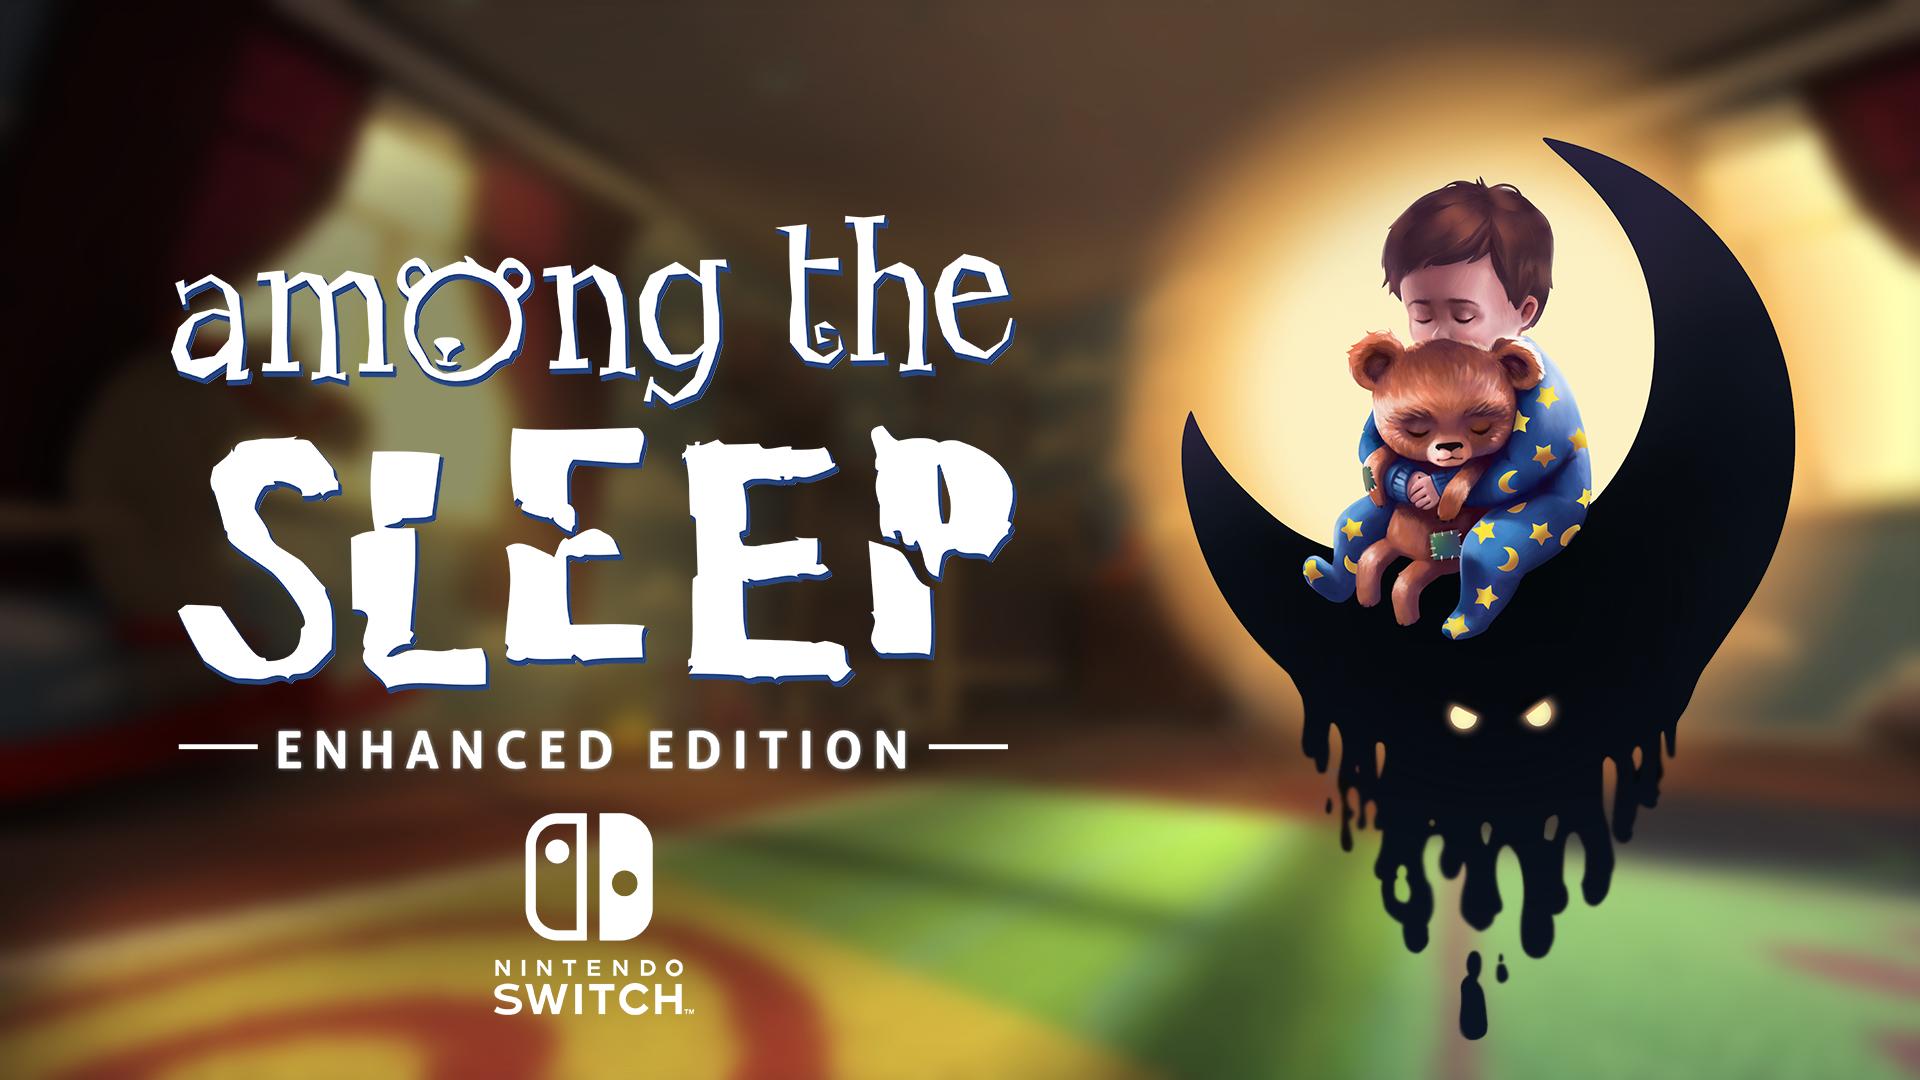 SOΞDΞSCO the Sleep Edition is now available on Nintendo Switch digitally and physically! Additionally, a new physical edition was released for PS4 and Xbox One. Who's gonna